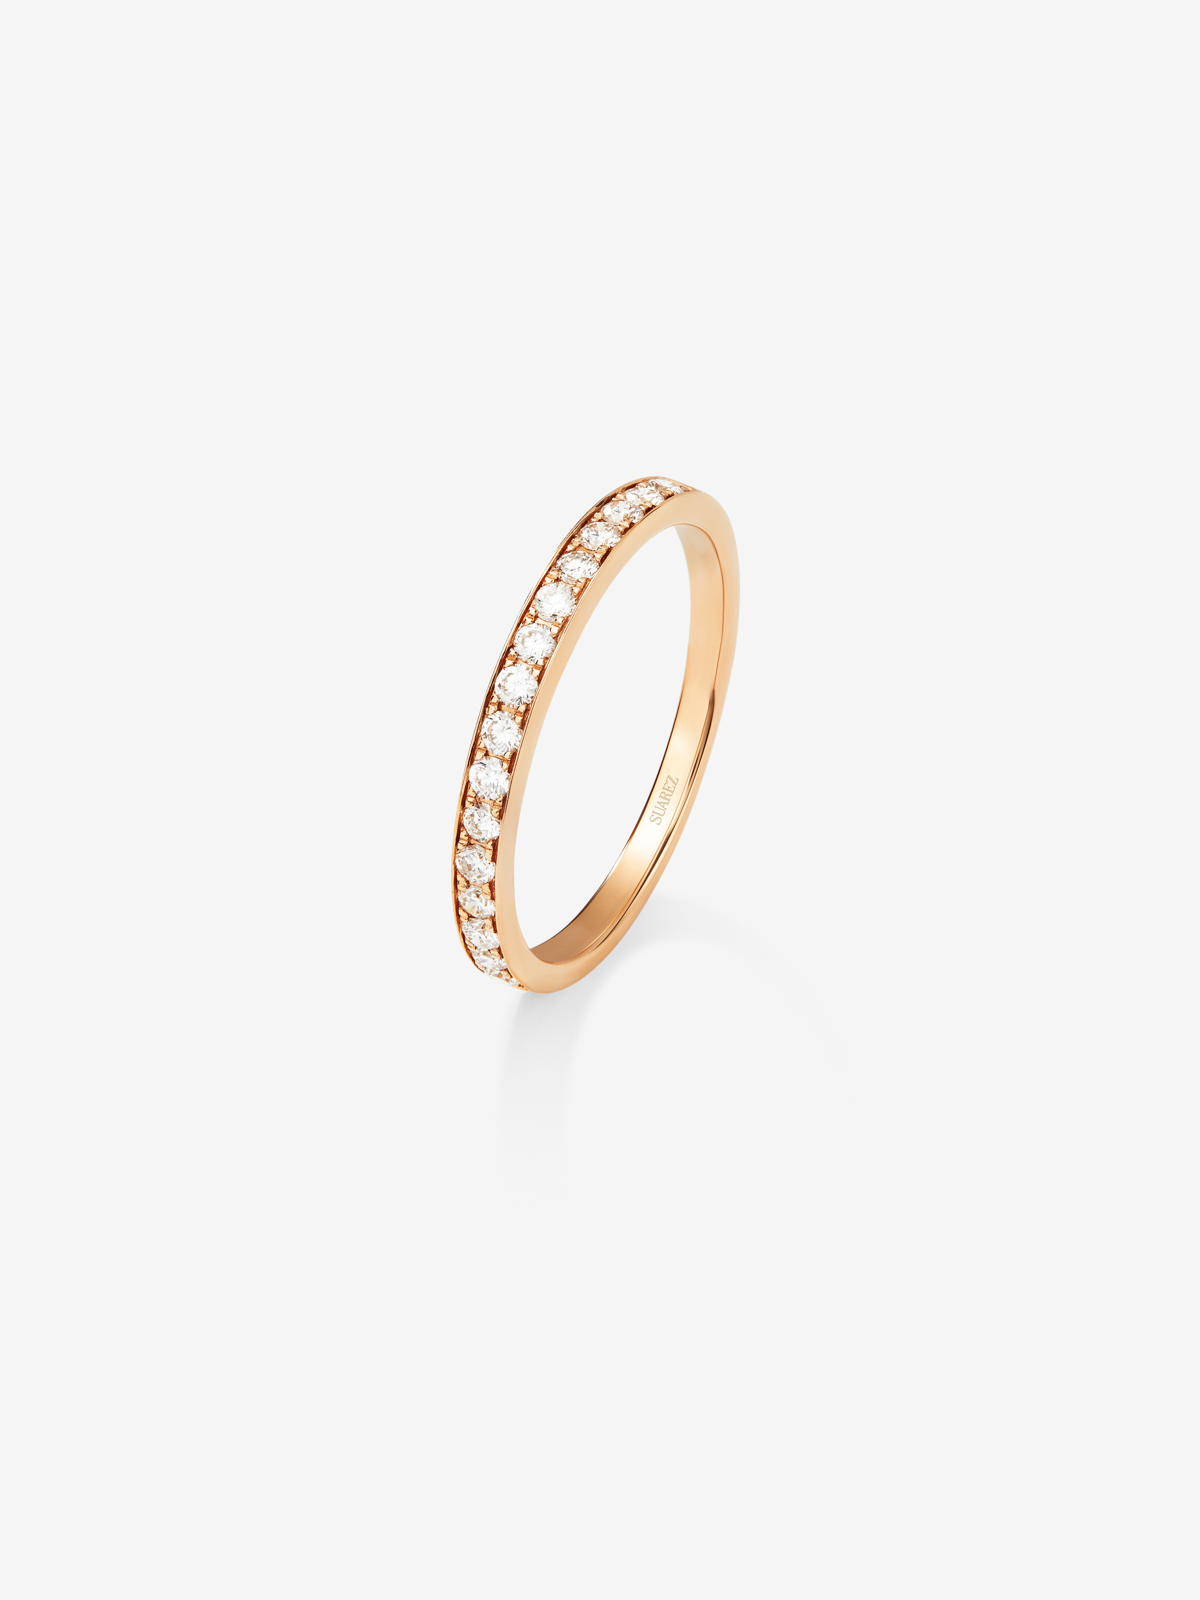 Half 18k rose gold alliance with white diamonds of 0.15 cts